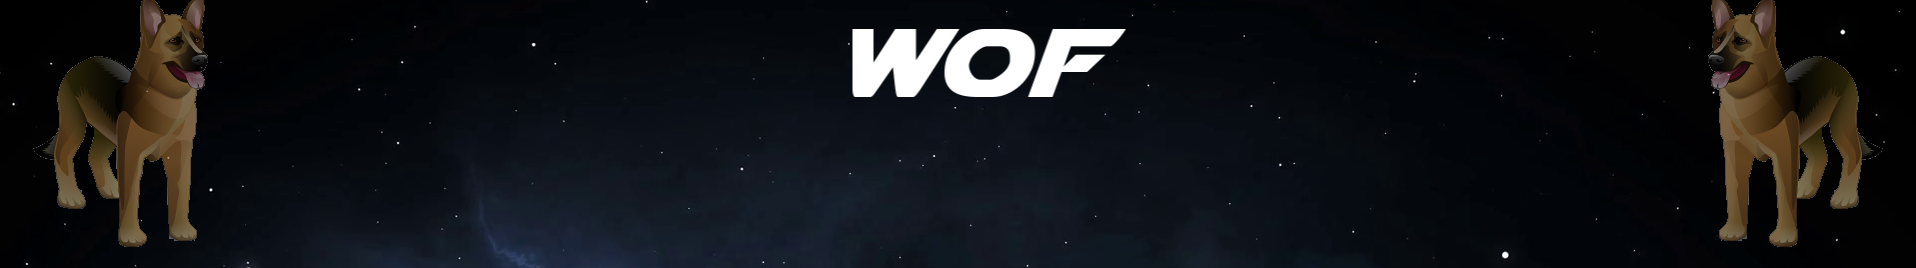 WOF - A Dogs Game